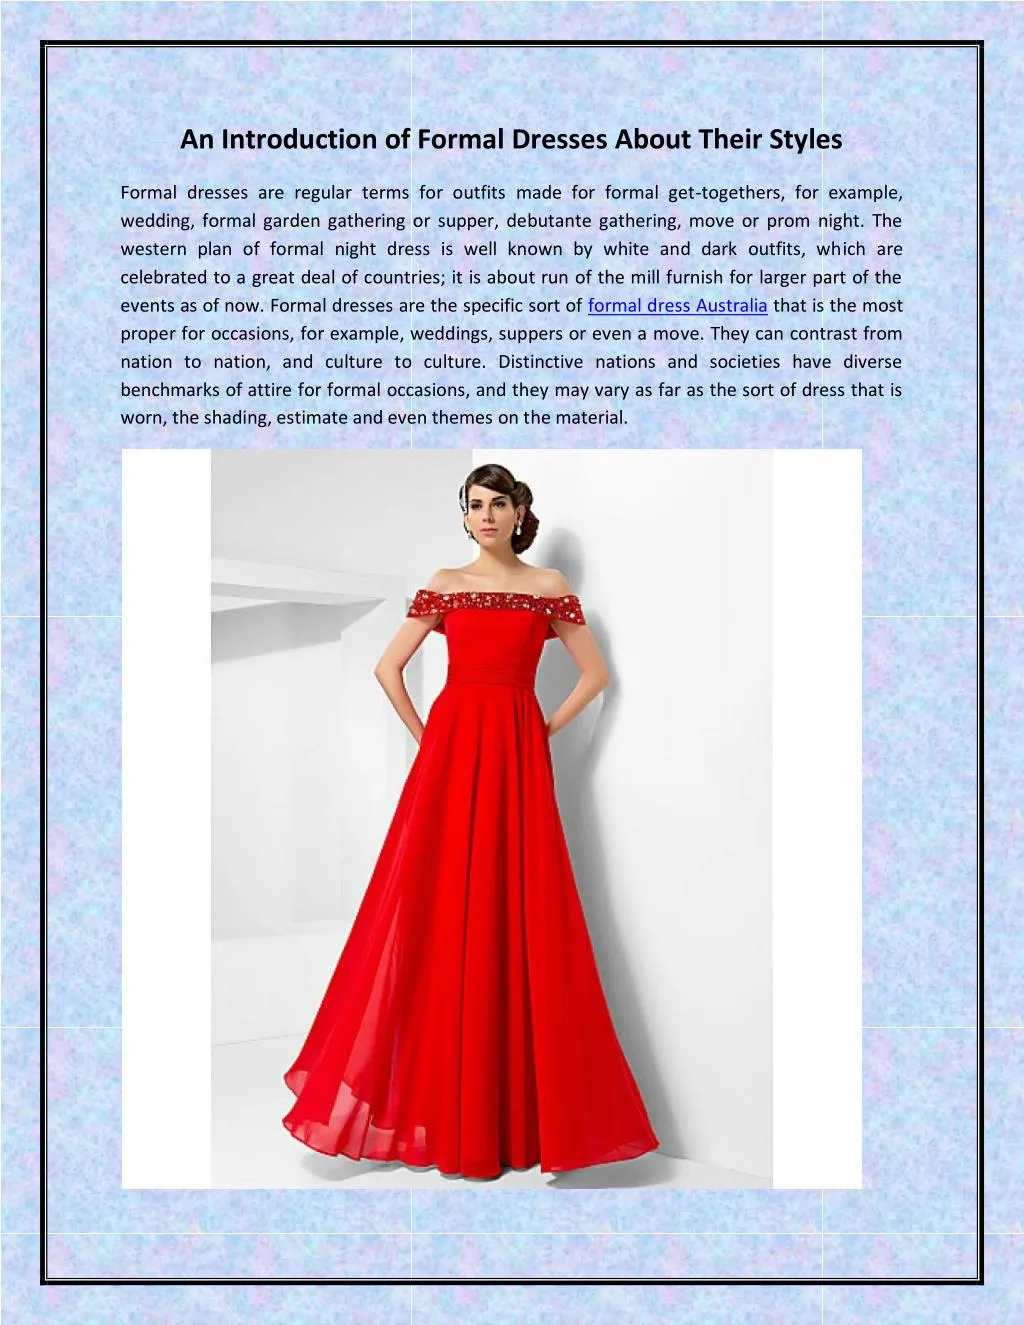 an introduction of formal dresses about their